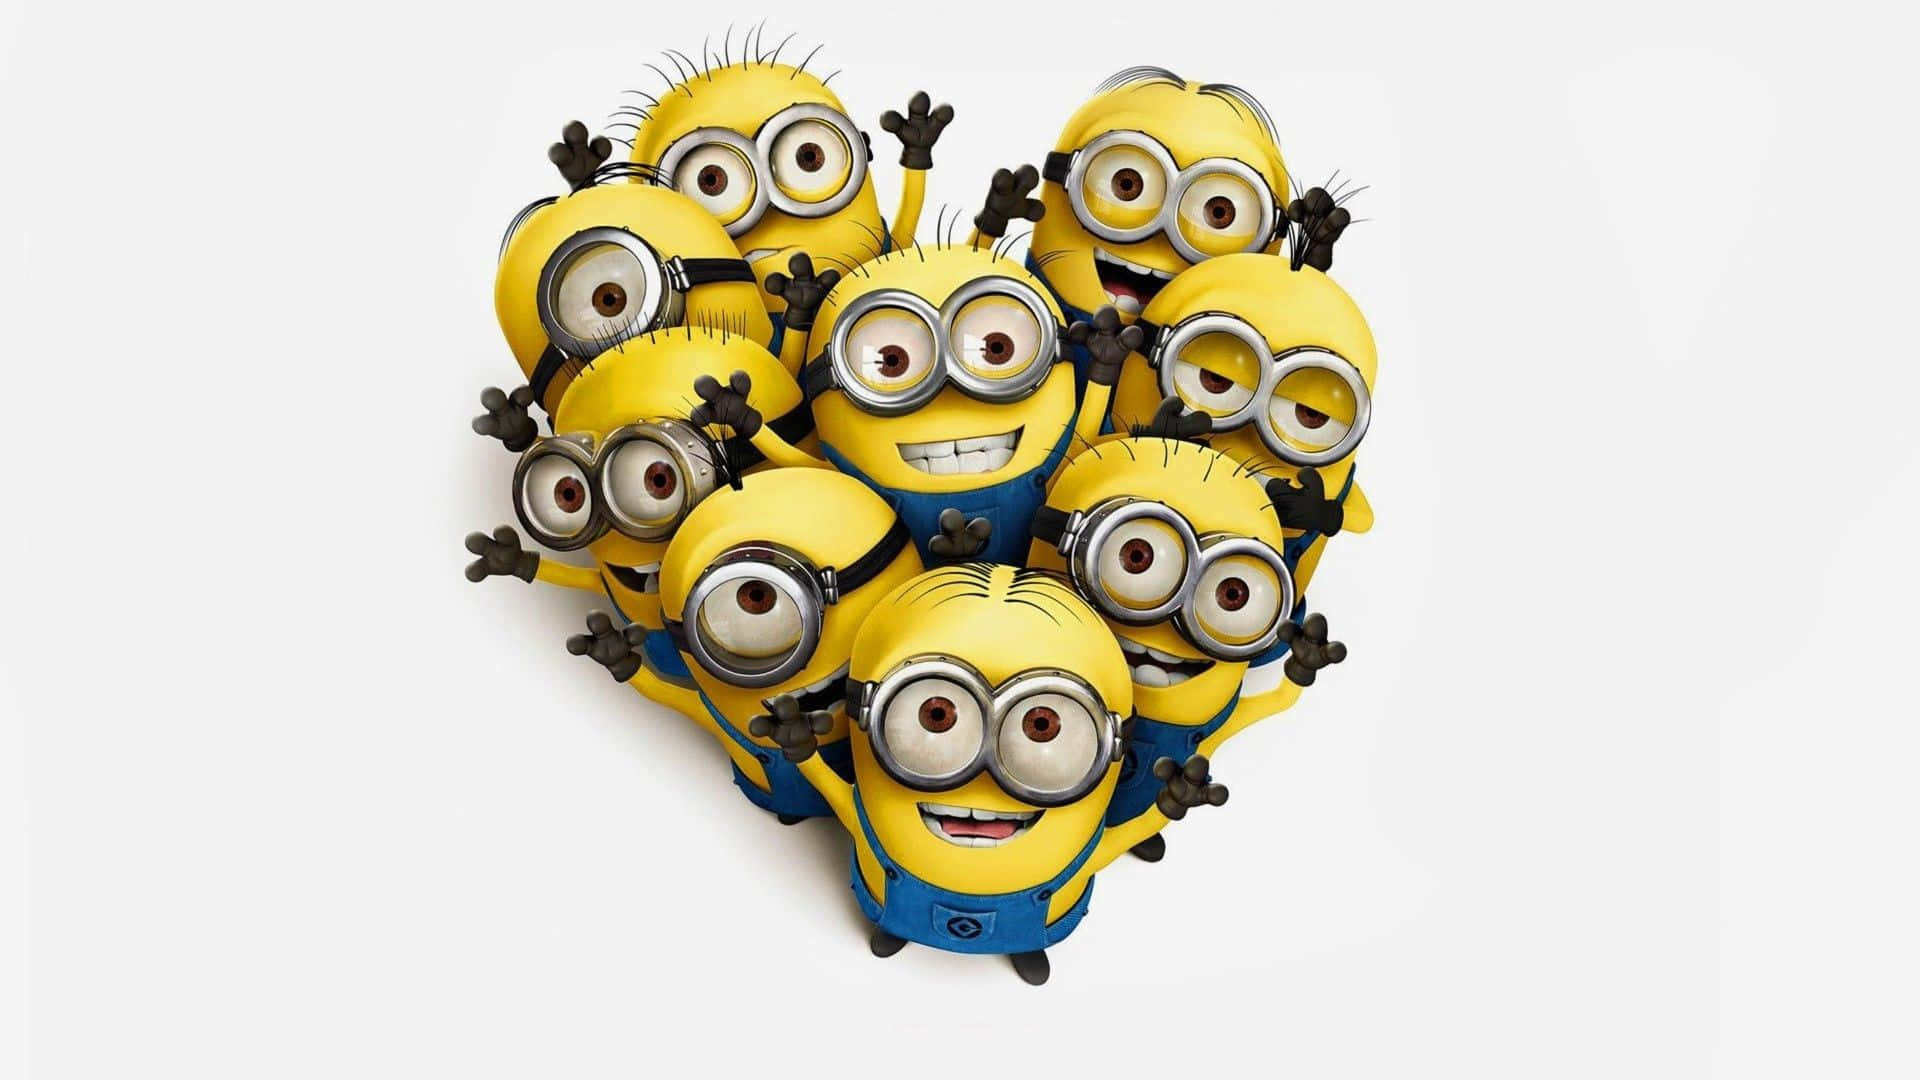 Come join the Minion's mischievous fun!